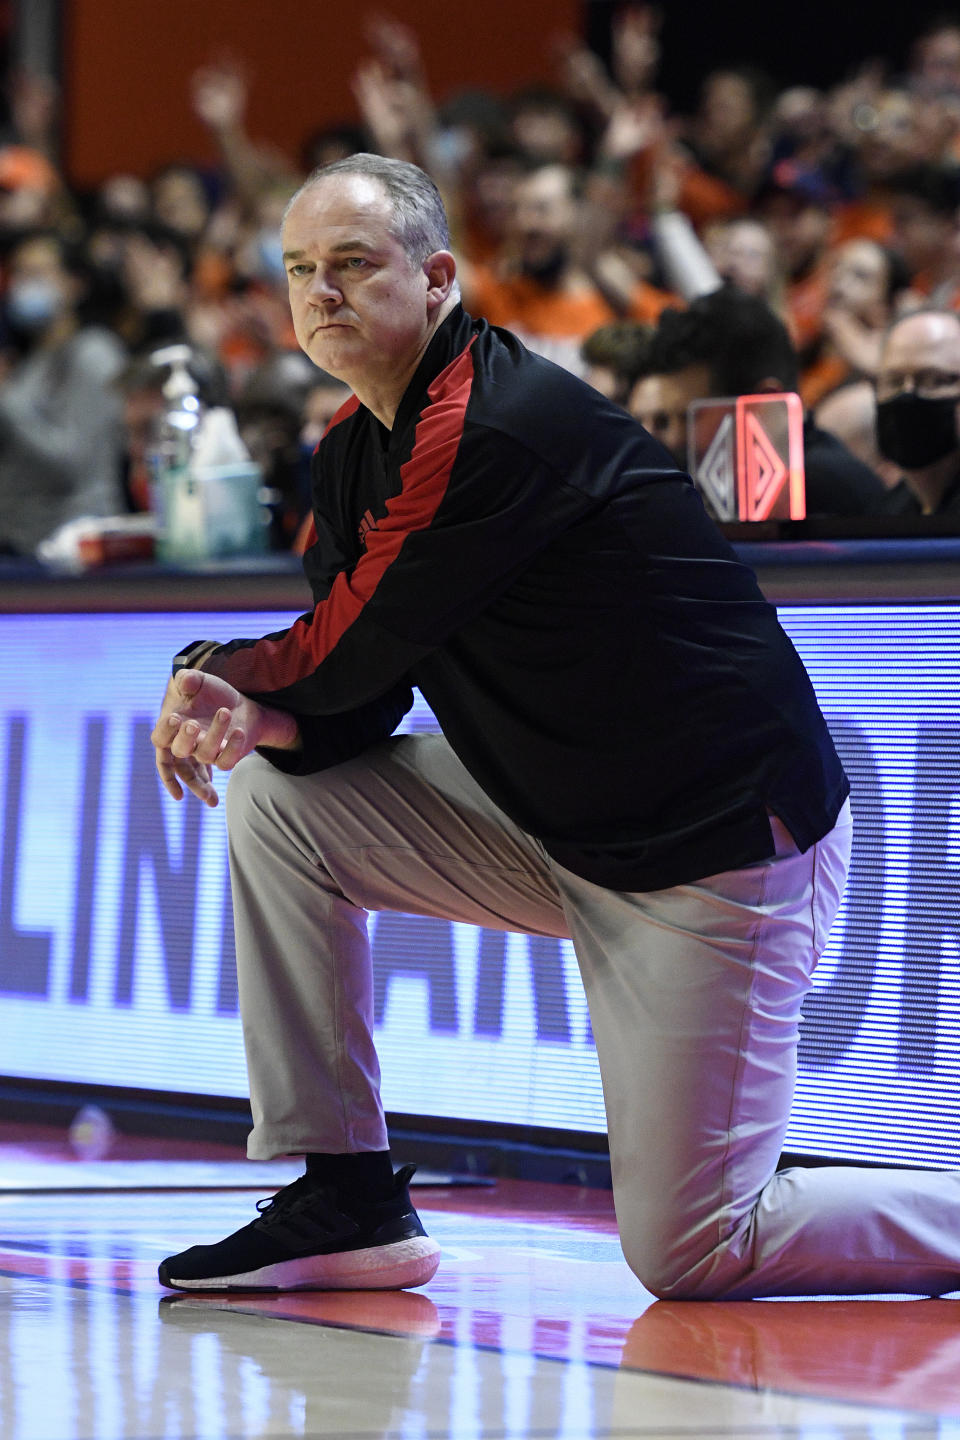 Rutgers coach Steve Pikiell kneels during the first half of the team's NCAA college basketball game against Illinois on Friday, Dec. 3, 2021, in Champaign, Ill. (AP Photo/Michael Allio)